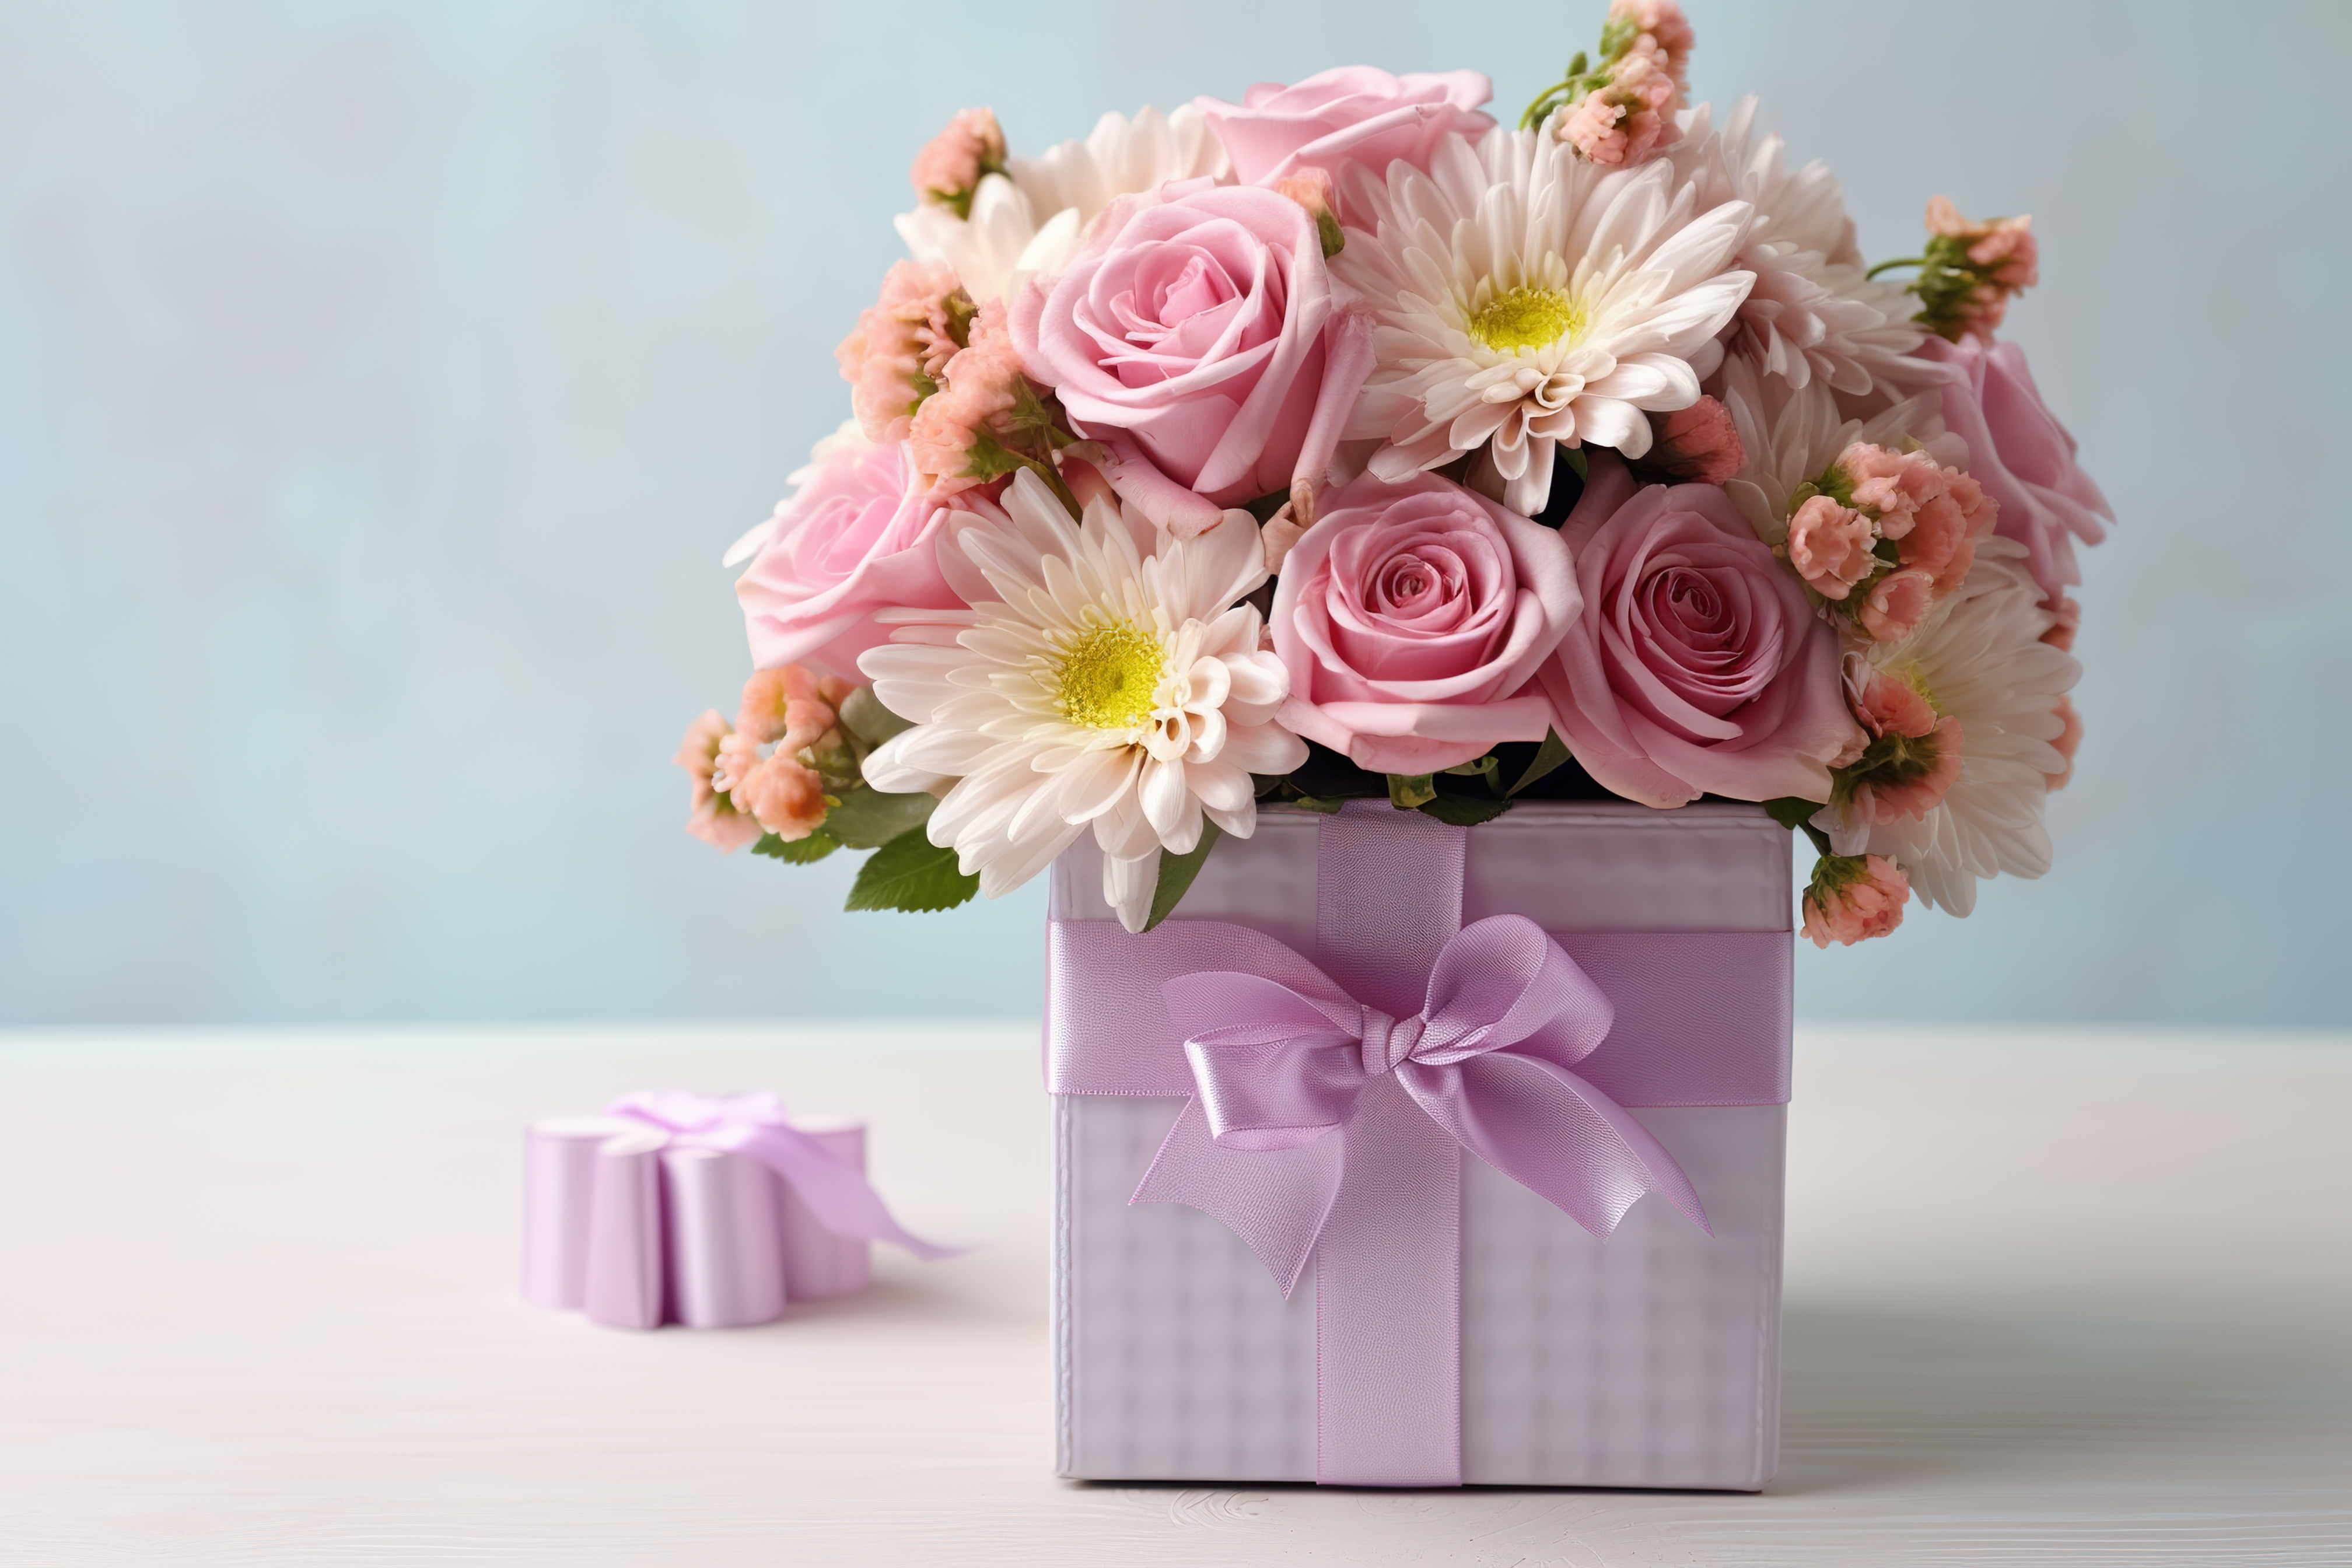 Square pink flower box with fresh roses